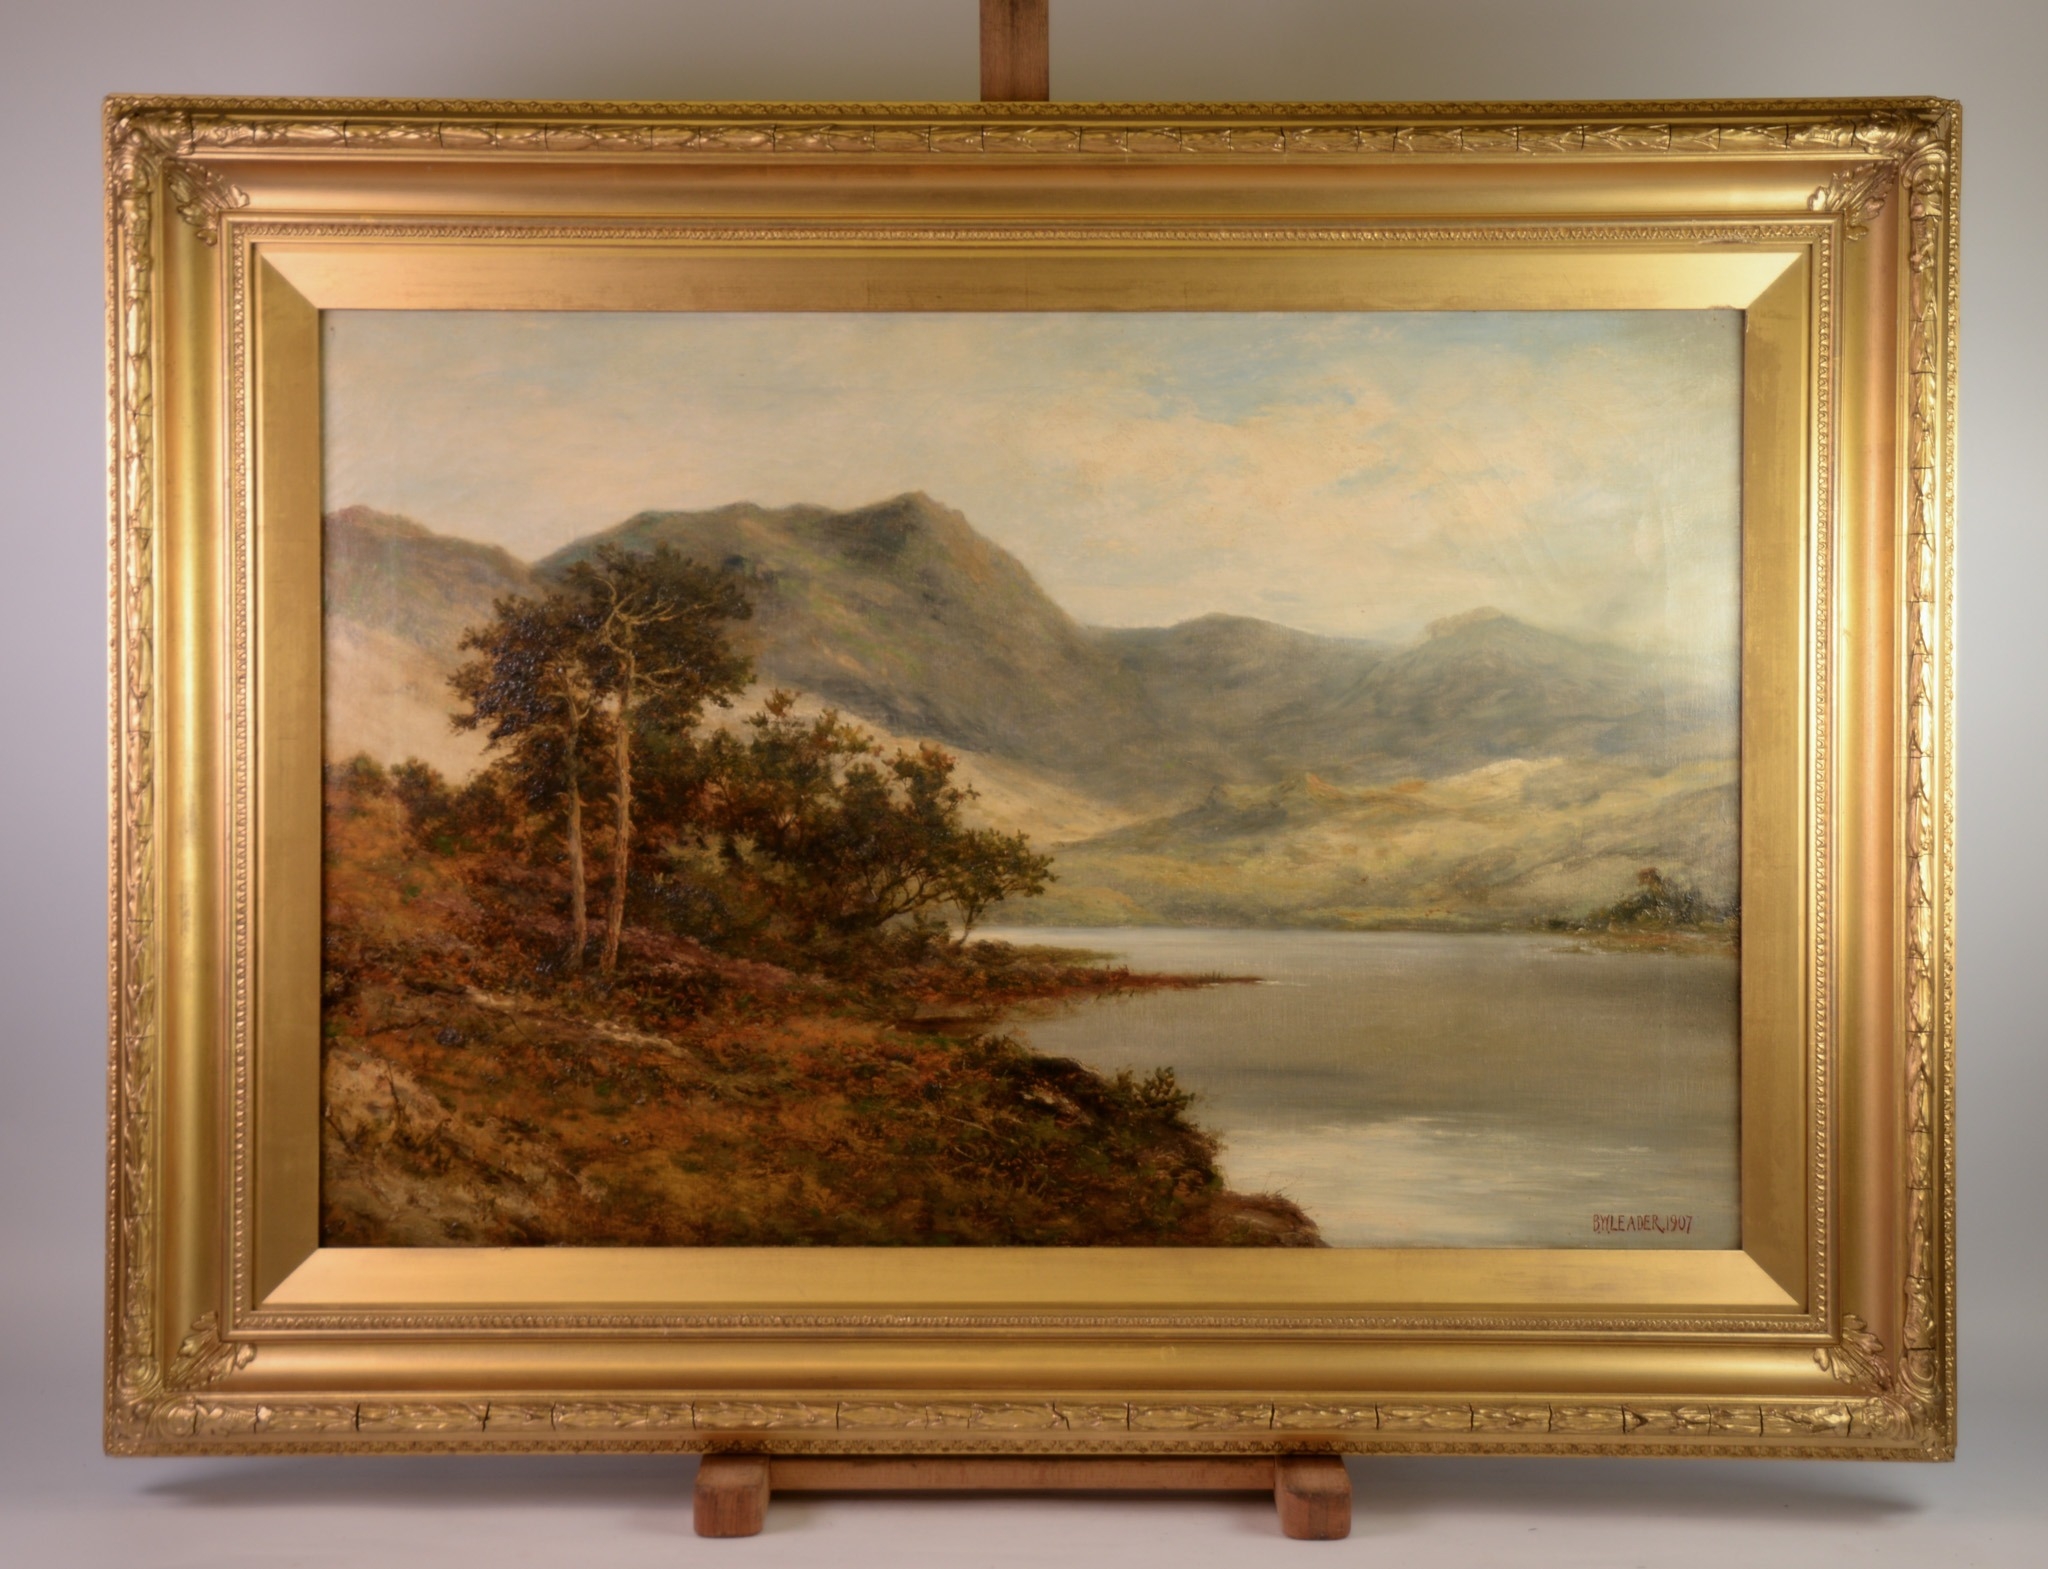 BENJAMIN WILLIAMS LEADER (1831 – 1923) OIL ON CANVAS Landscape with lake and mountains Signed and - Image 3 of 4